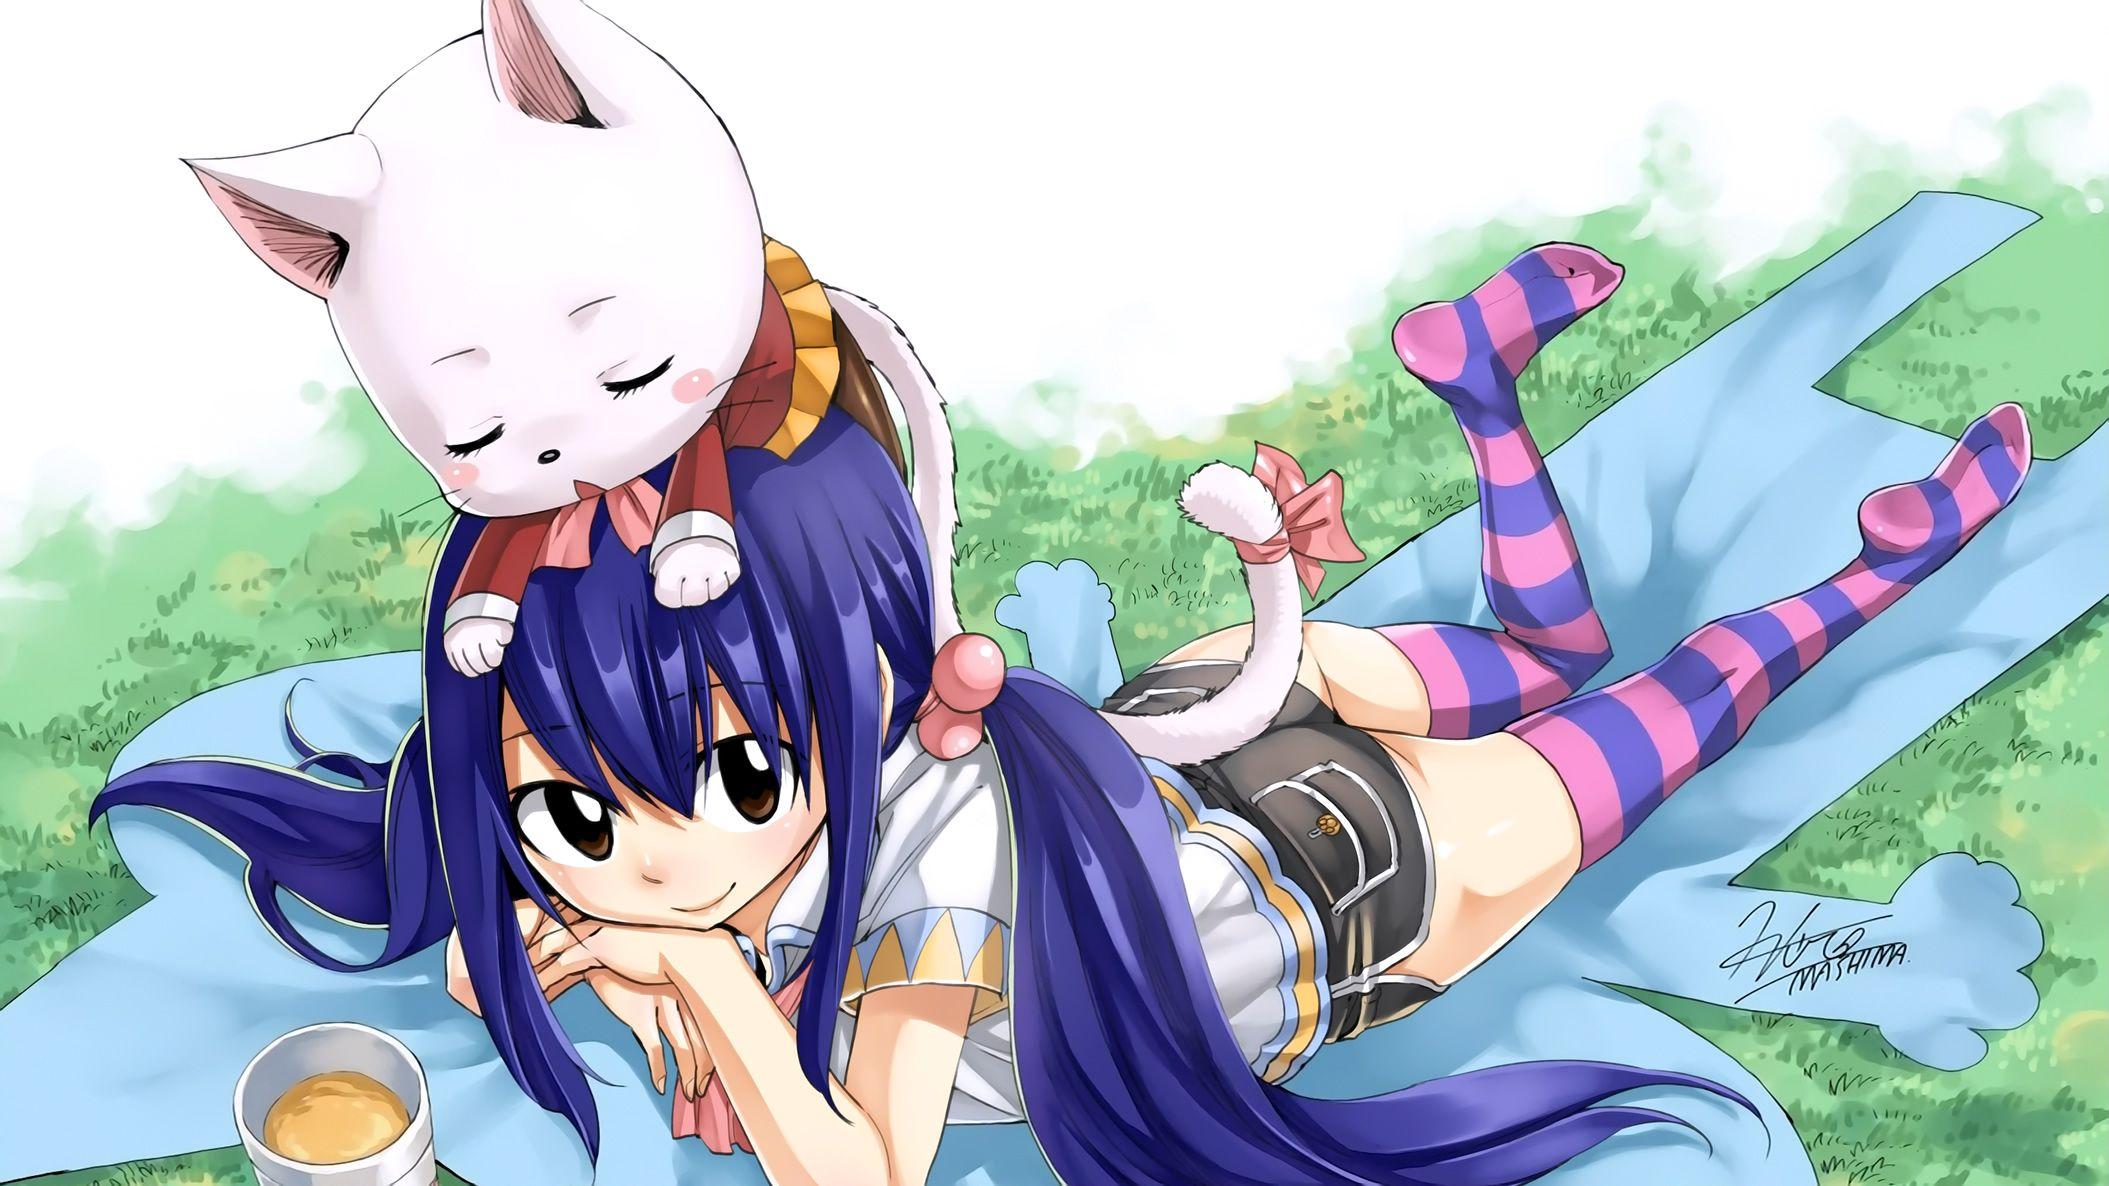 HD wallpaper: Anime, Fairy Tail, Wendy Marvell | Wallpaper Flare